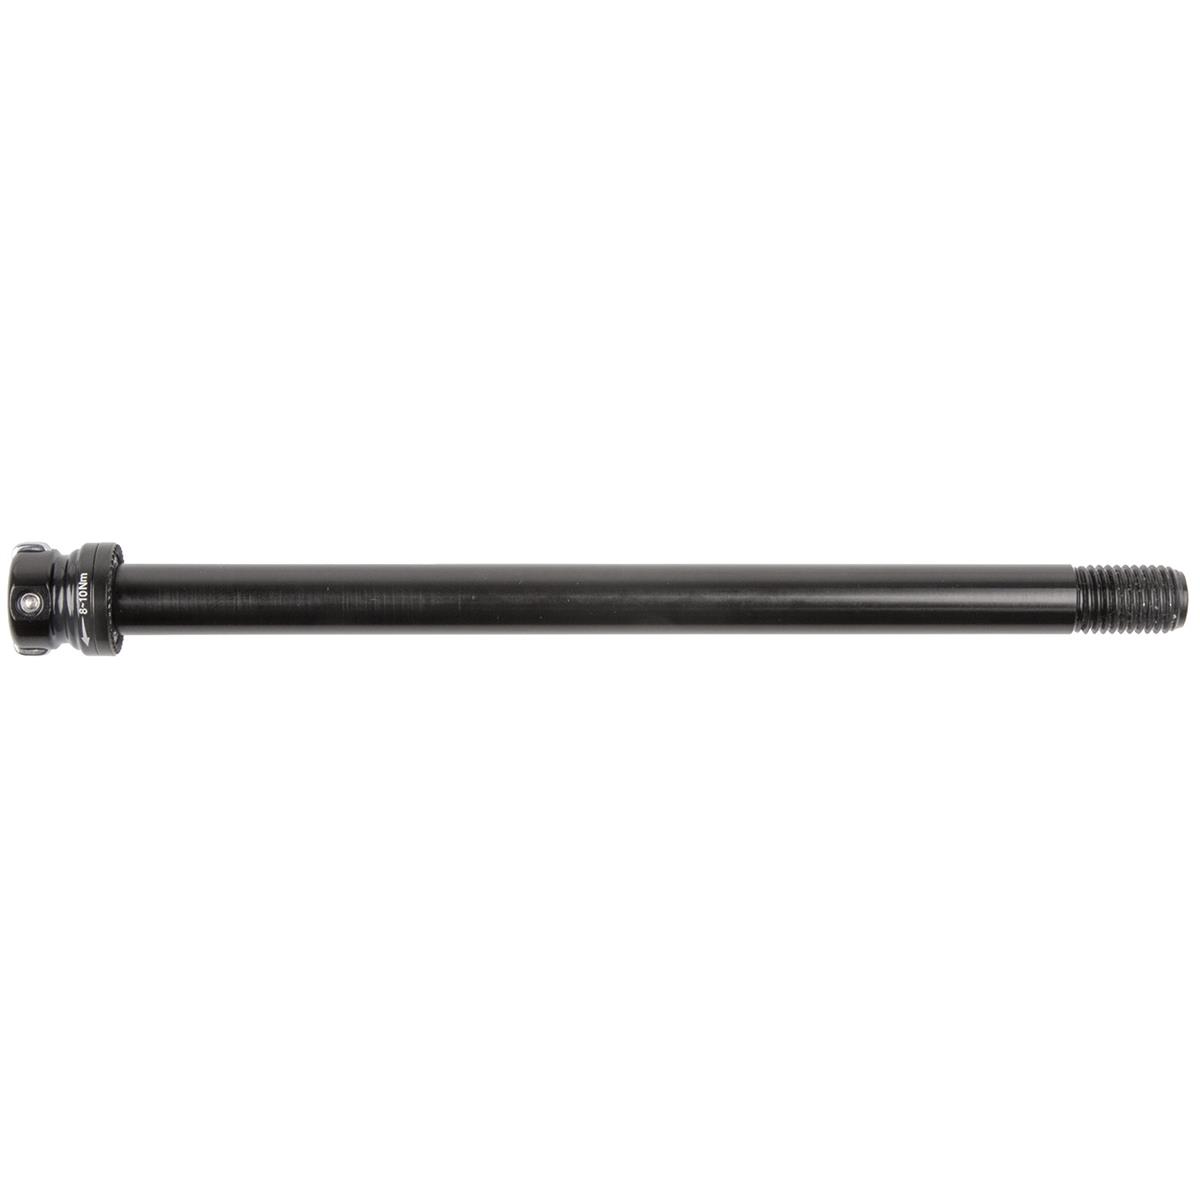 Thru Axle 12x142 Length 157mm With Retractable Lever